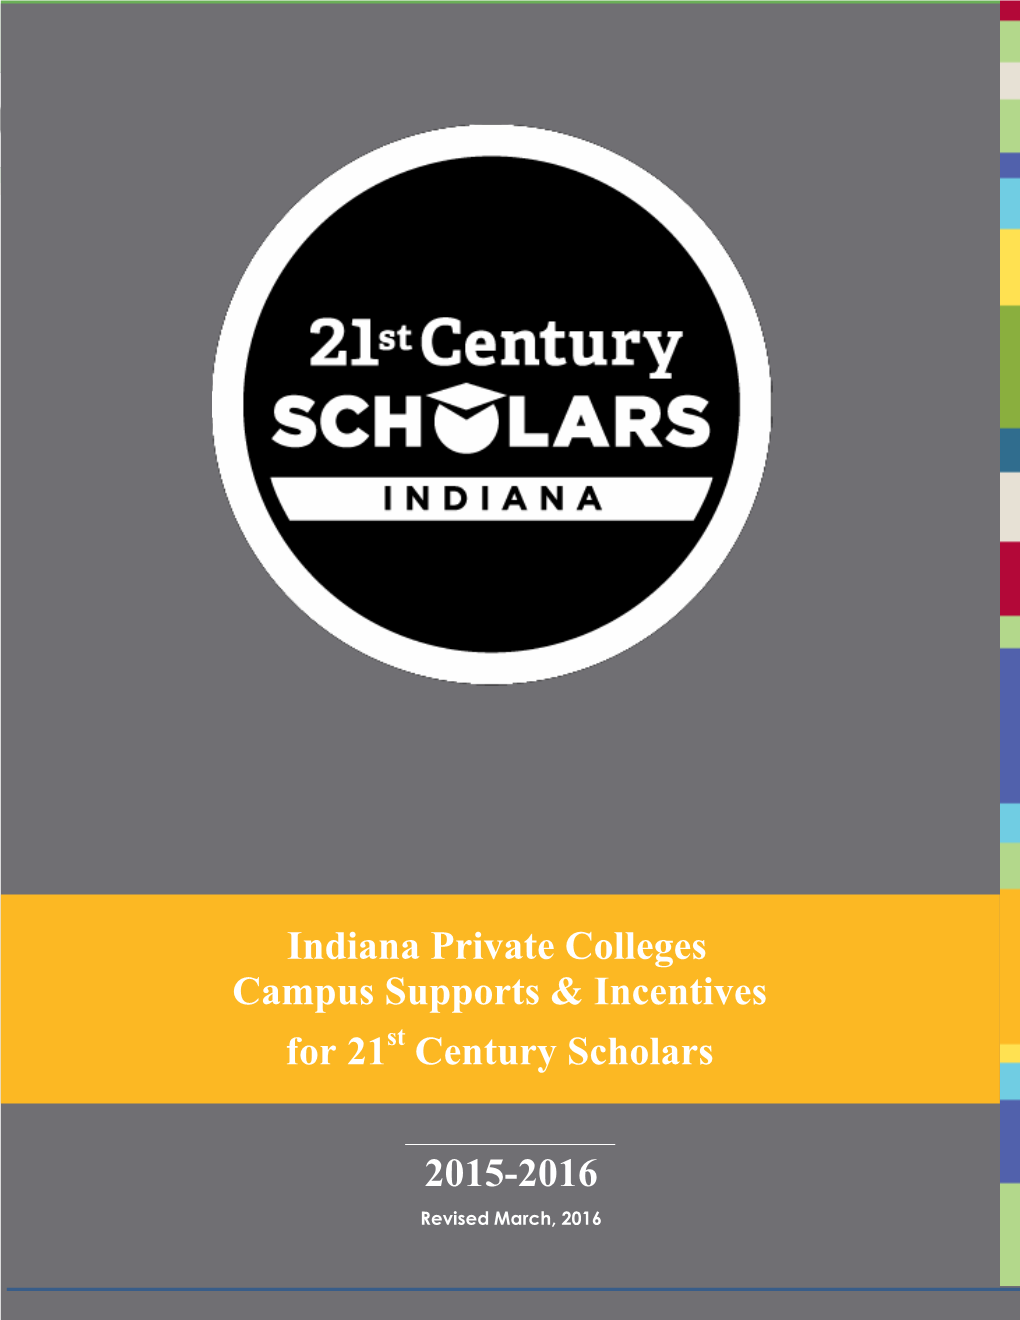 Indiana Private Colleges Campus Supports & Incentives for 21 Century Scholars 2015-2016